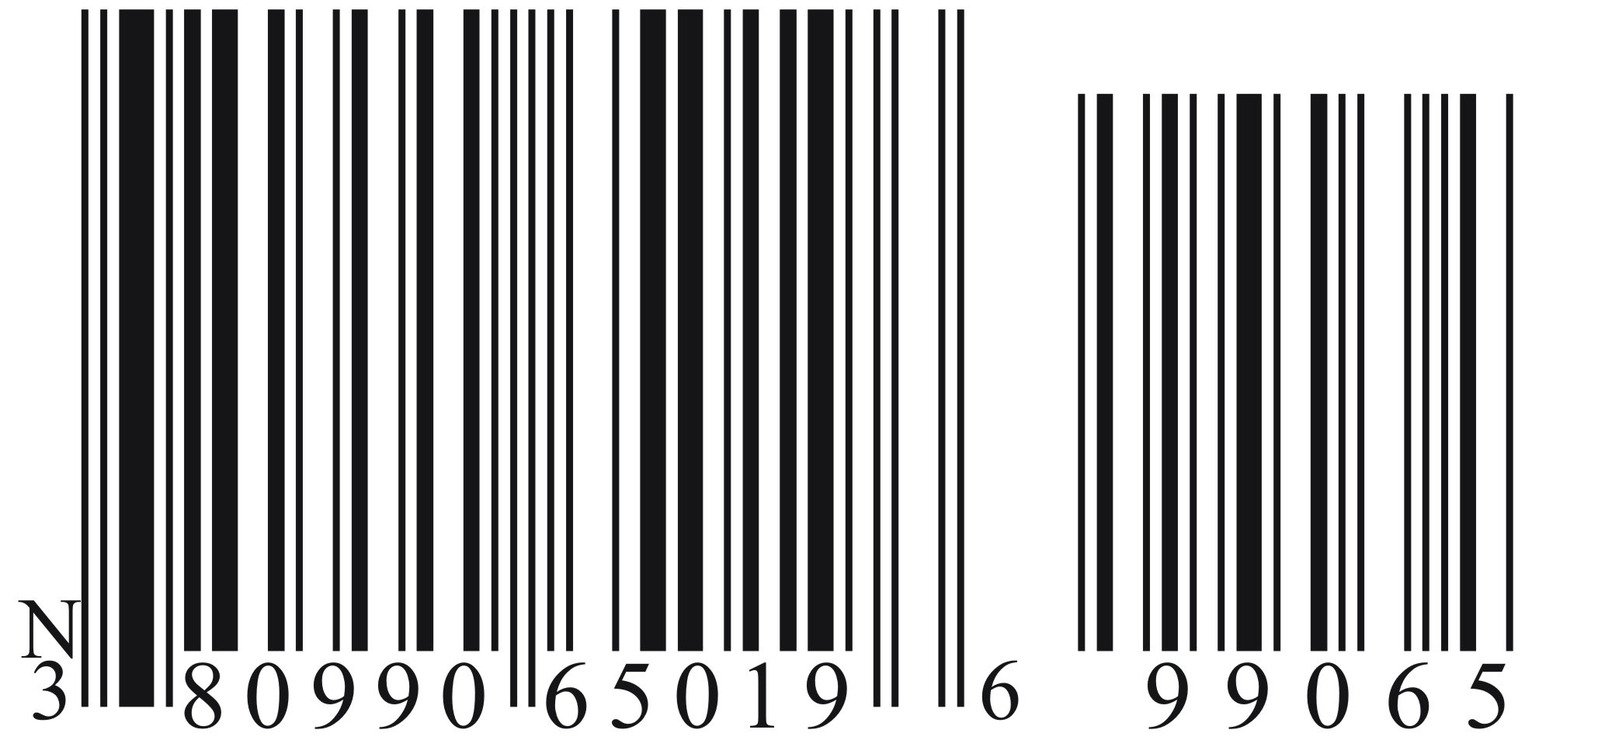 bar code and numbers are shown in three different styles